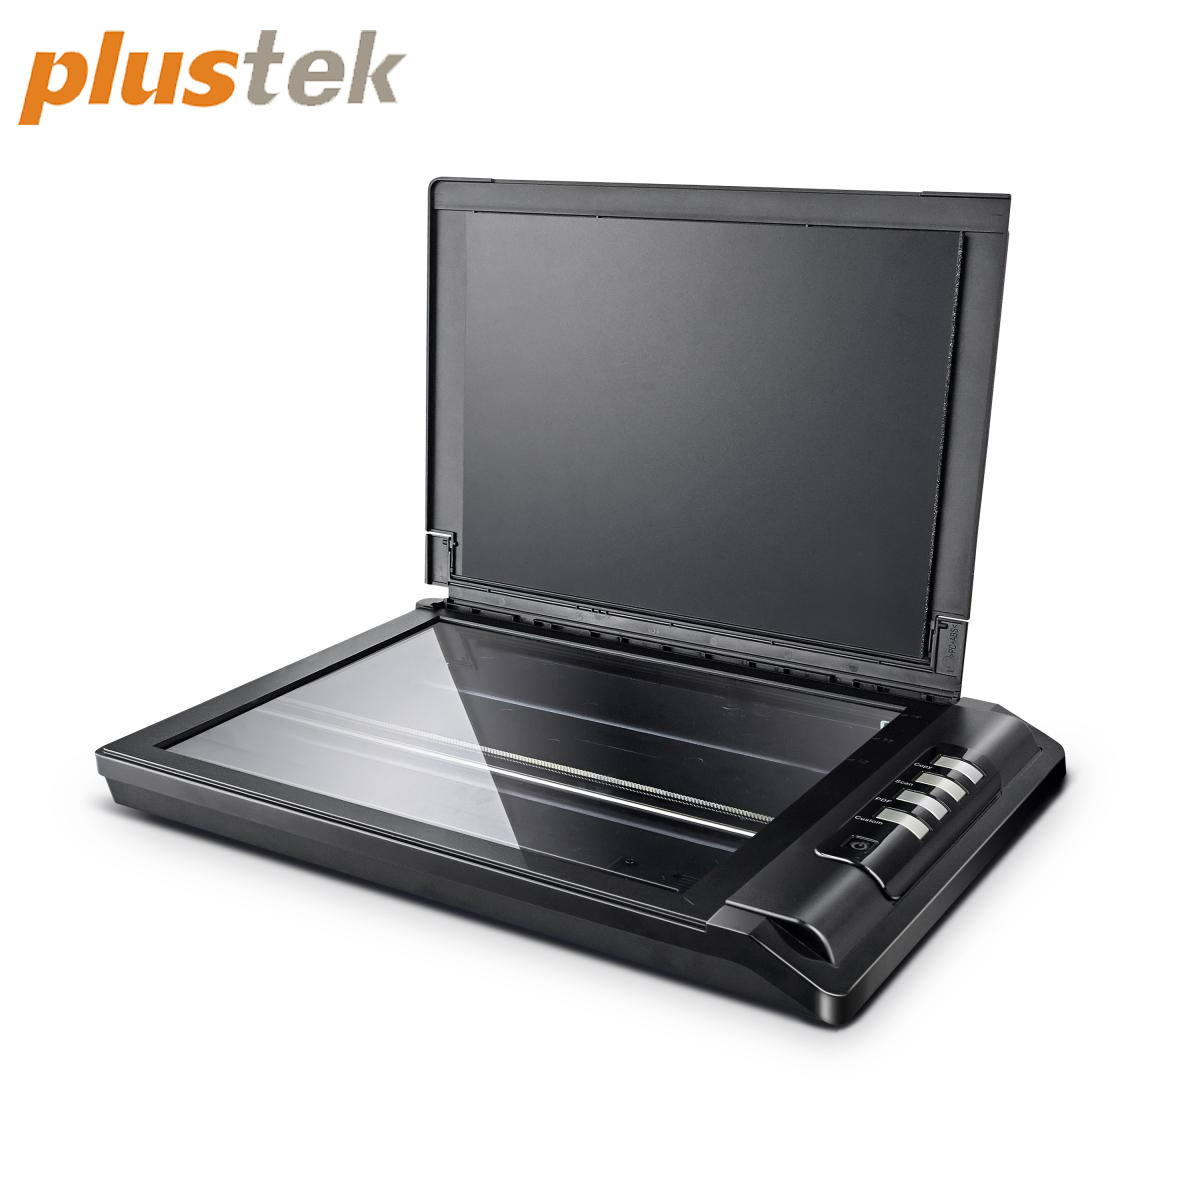 Plustek OpticSilm 2700 - High Speed Flatbed Scanner, 3sec Fast scan Speeds. Compact Design for Home and Home Office. Windows and Mac Support